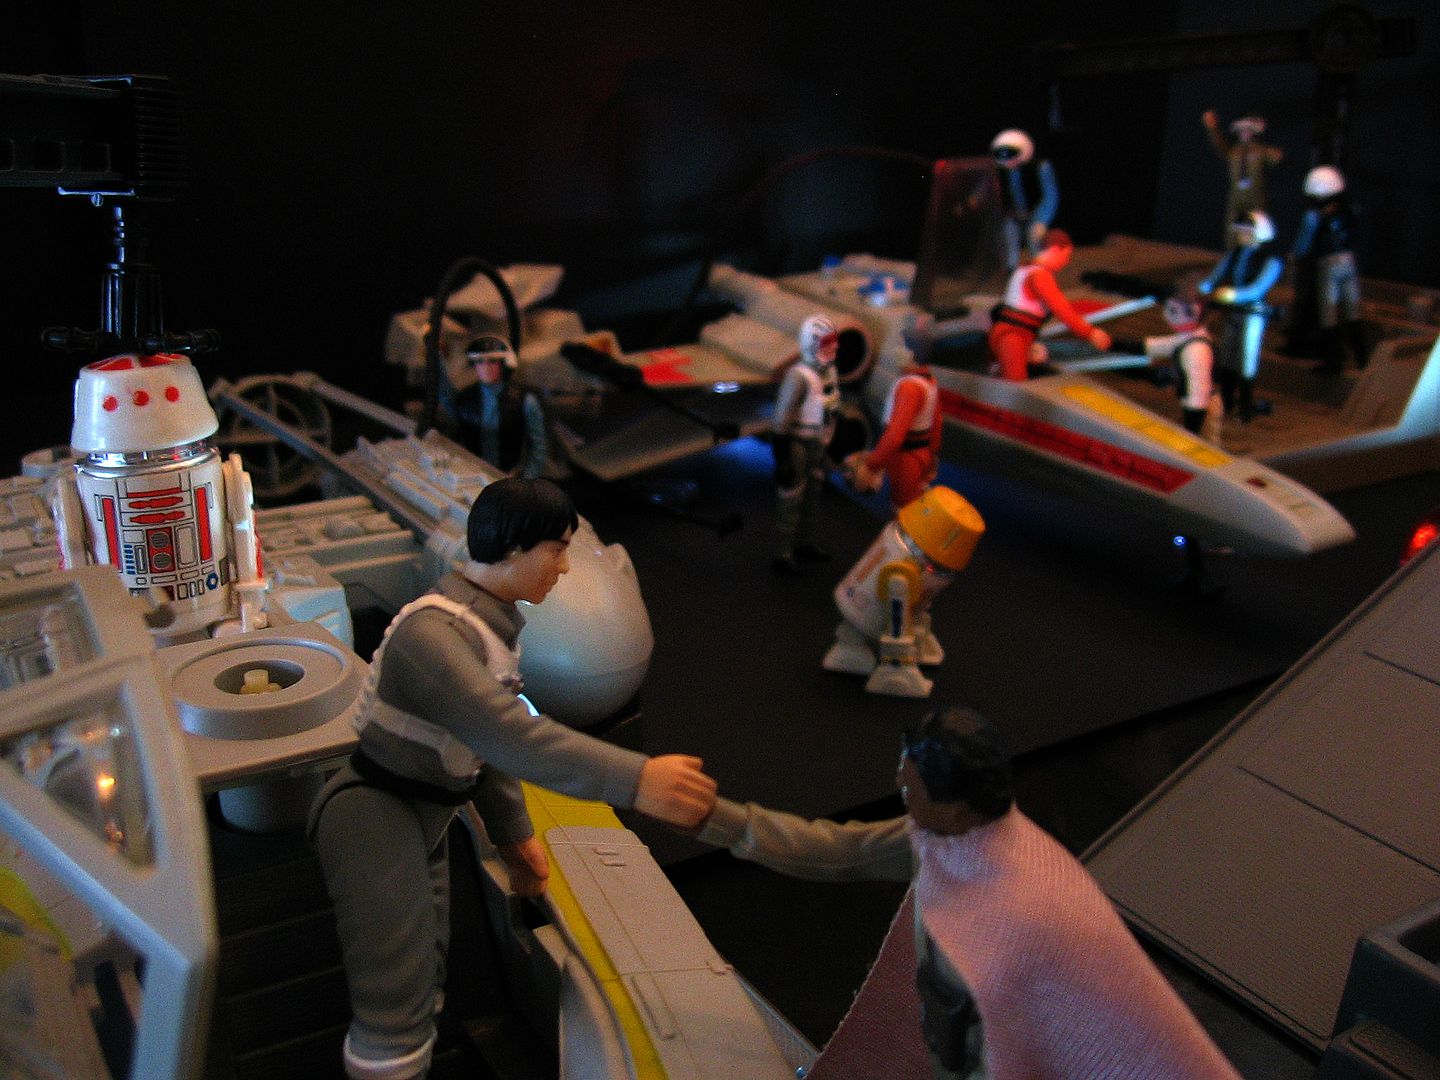 Star Wars Figures in Action!!: Overview On Page 1 IMG_5760_Processes_ContestRatherchildish_FINALVersion